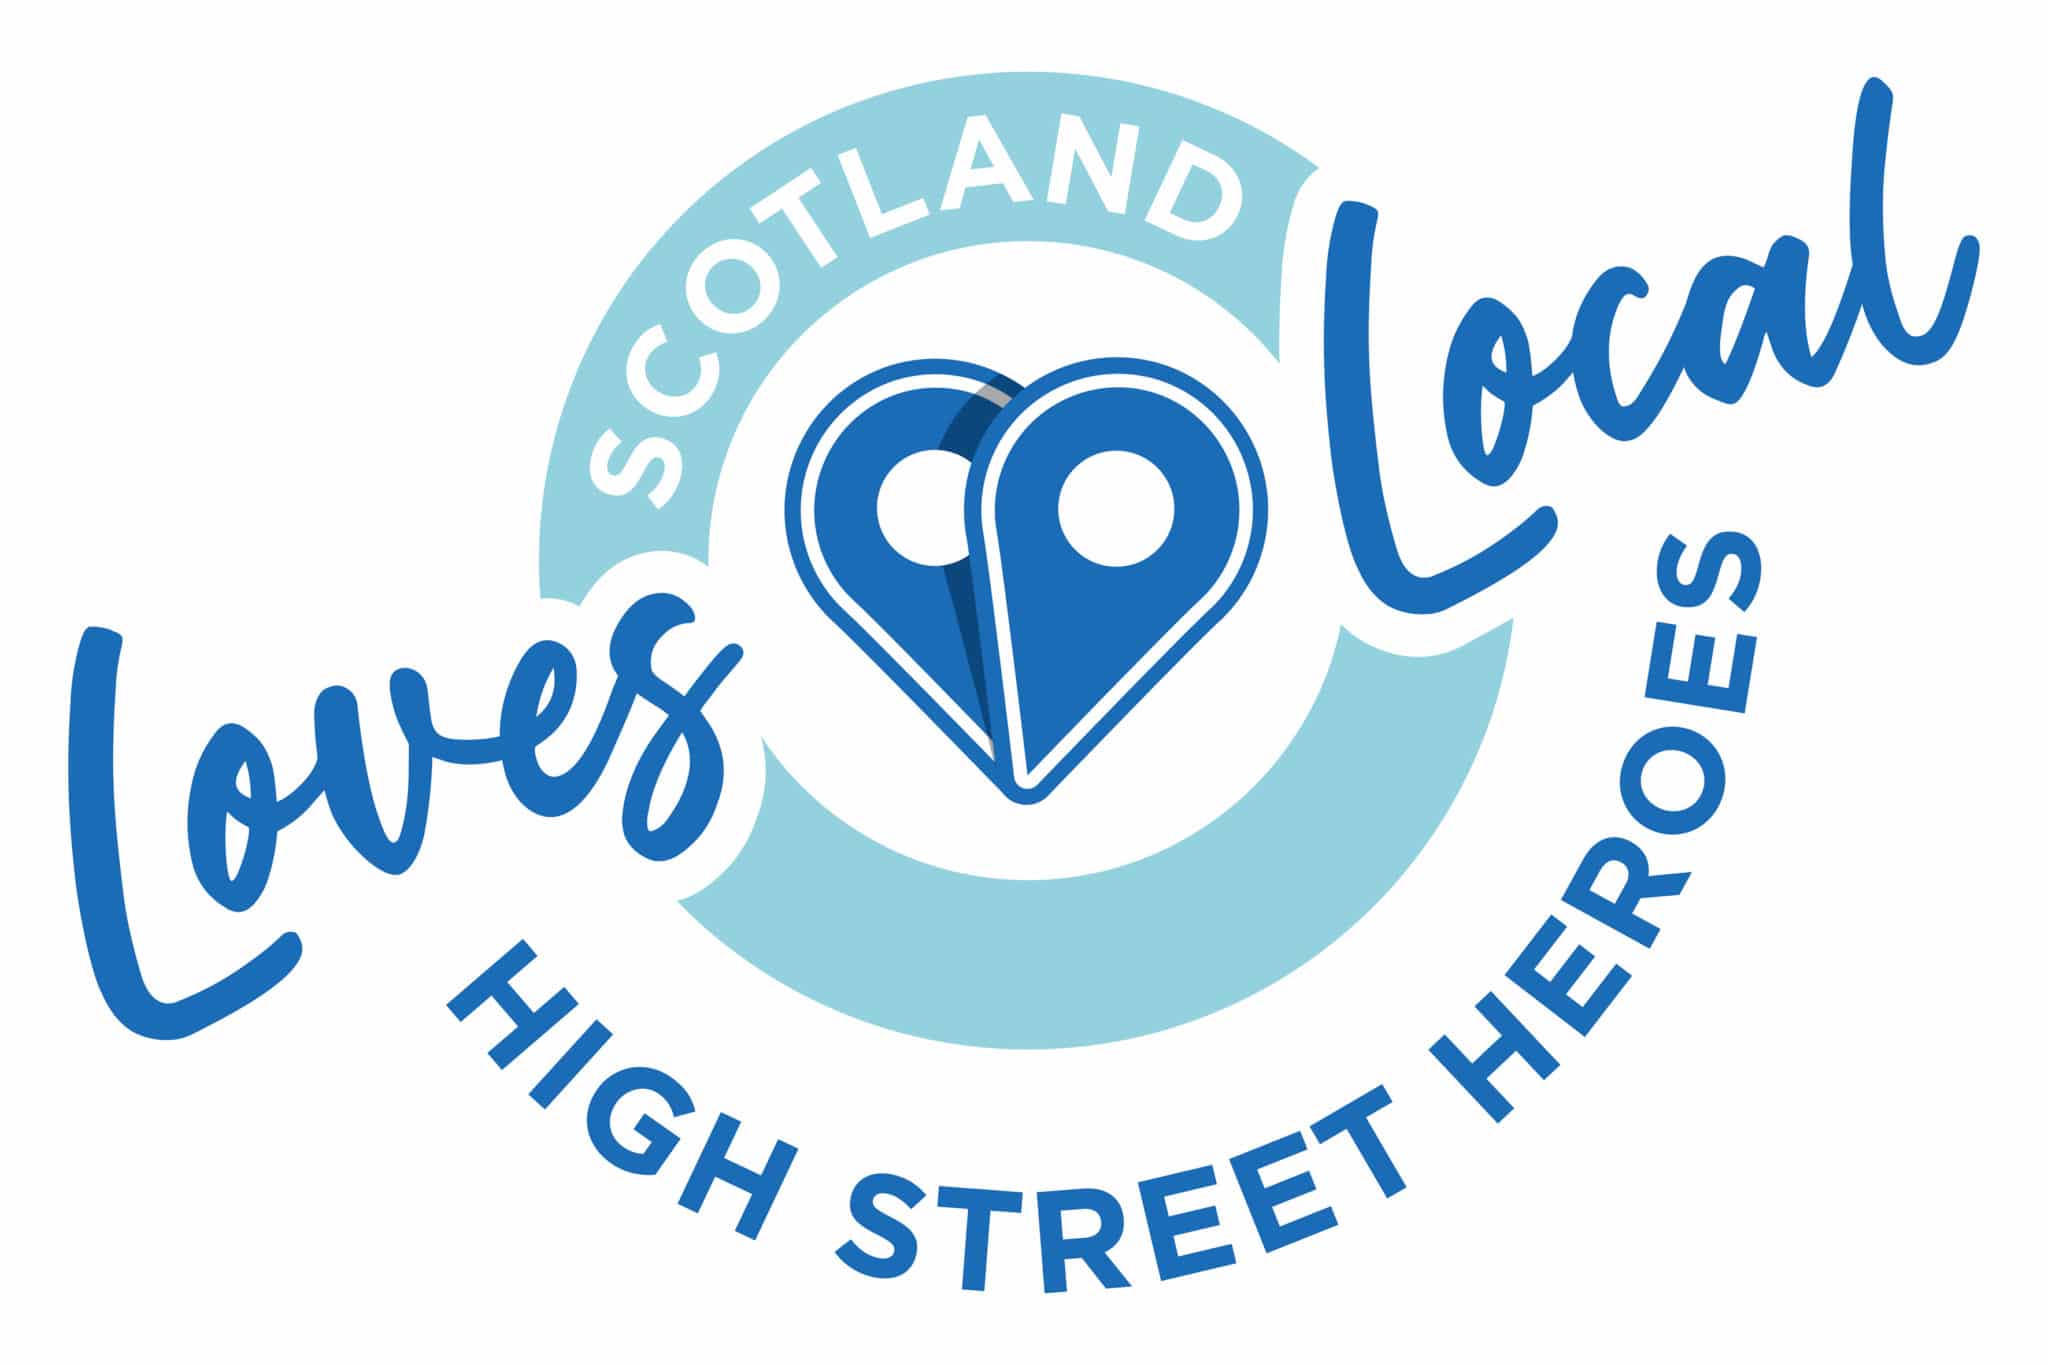 Picture illustrating high street heroes award